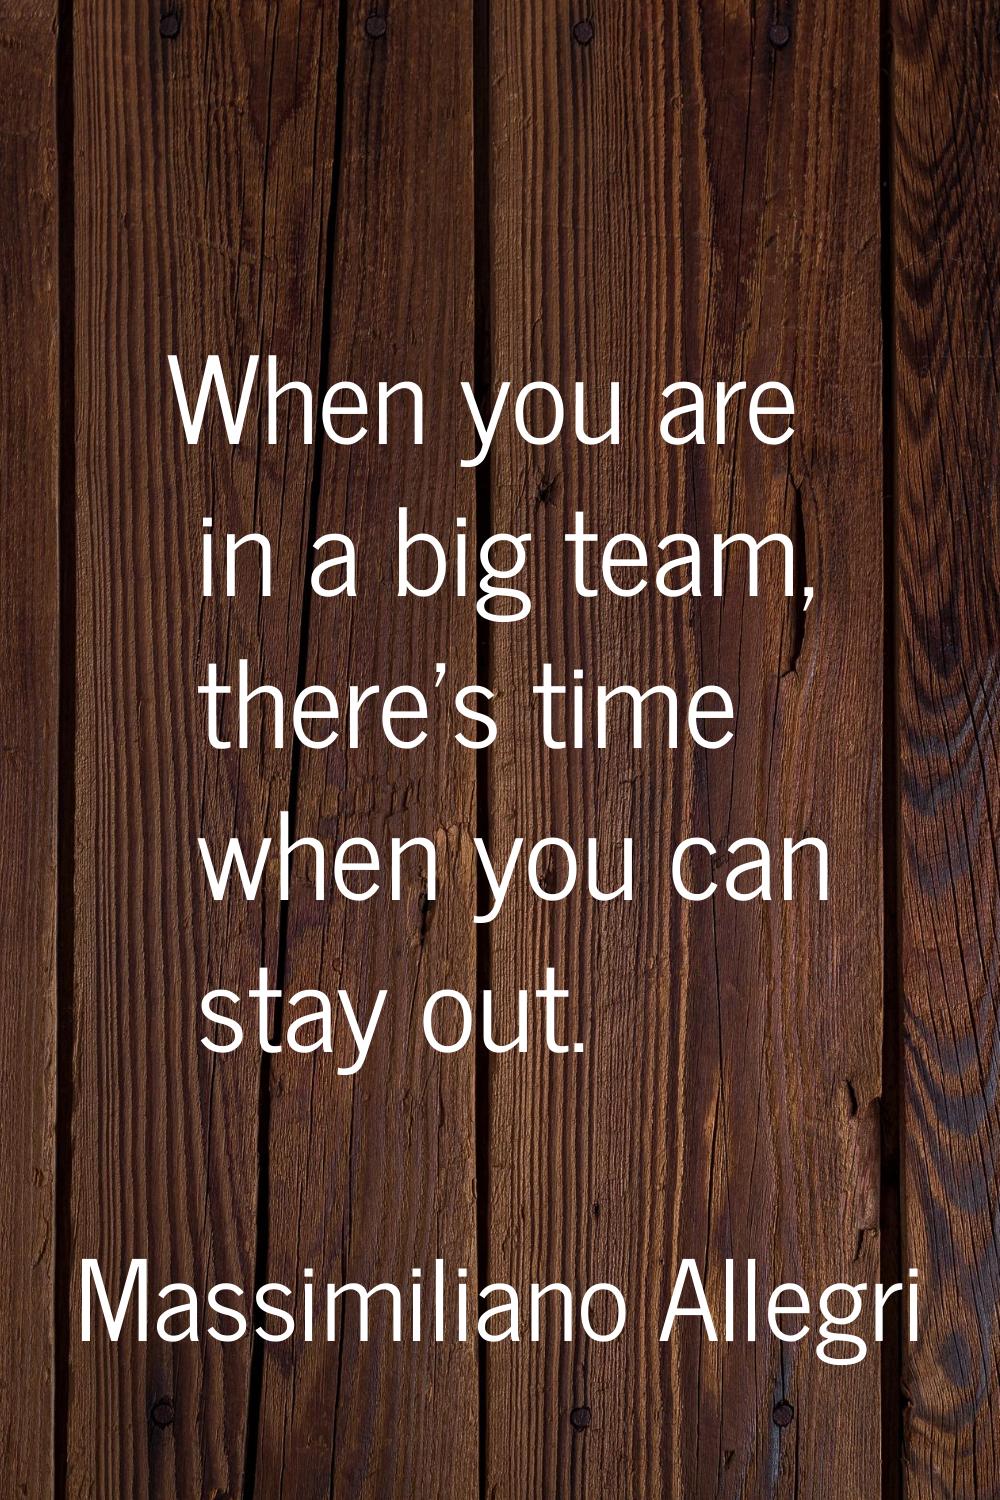 When you are in a big team, there's time when you can stay out.